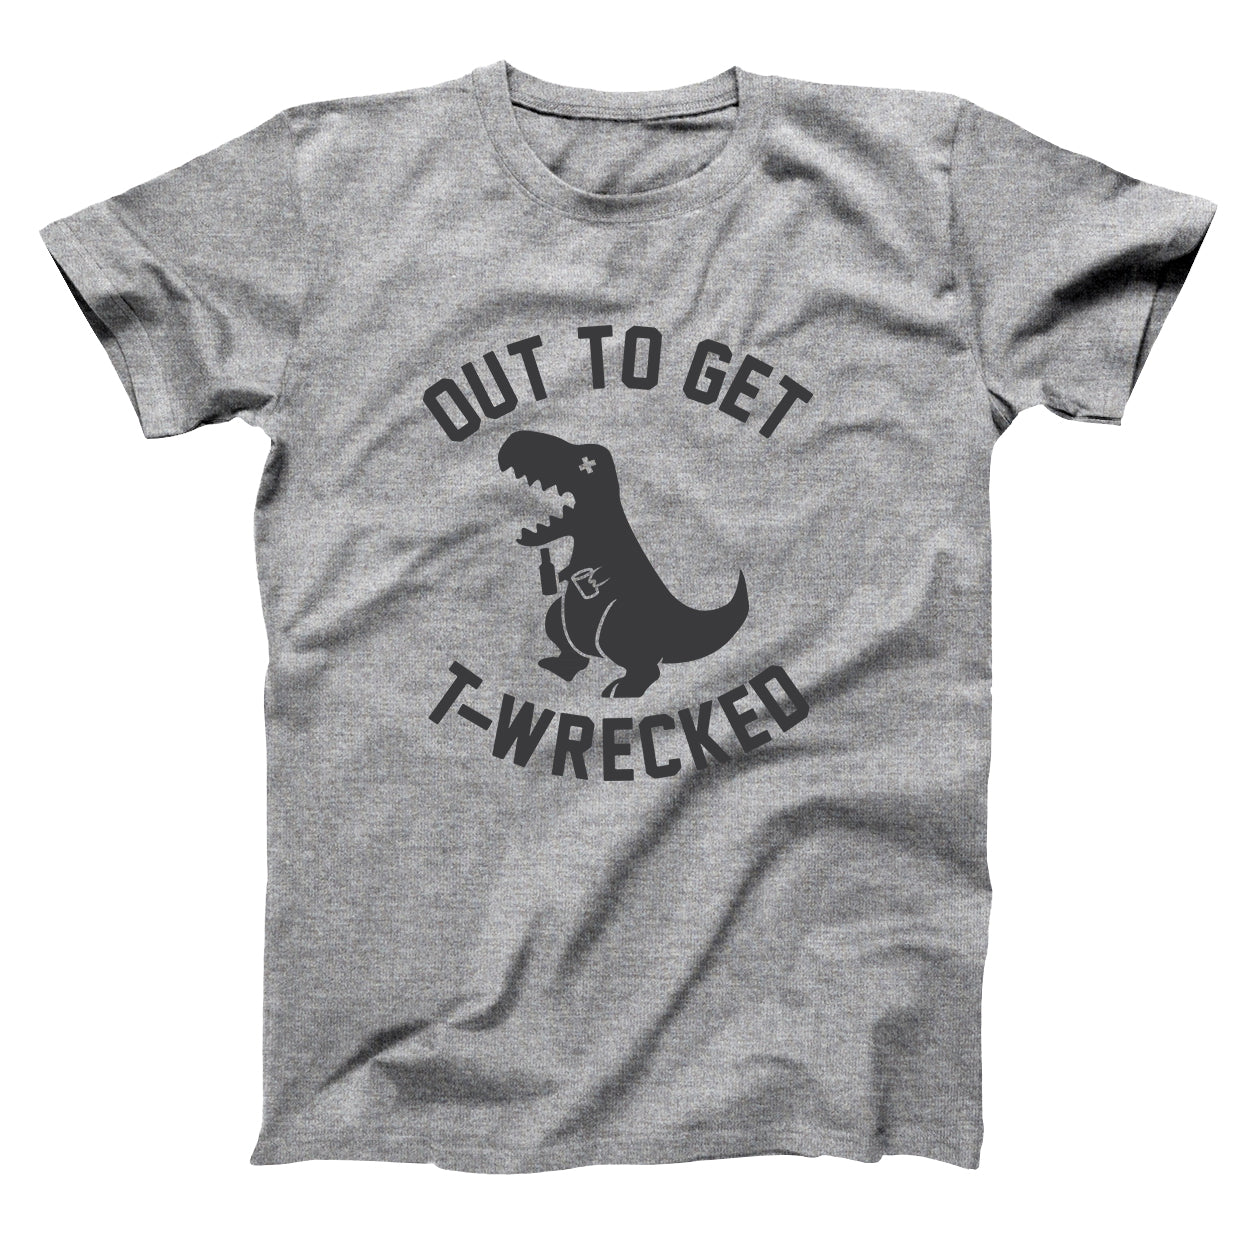 Out To Get T-WRECKED Tshirt - Donkey Tees